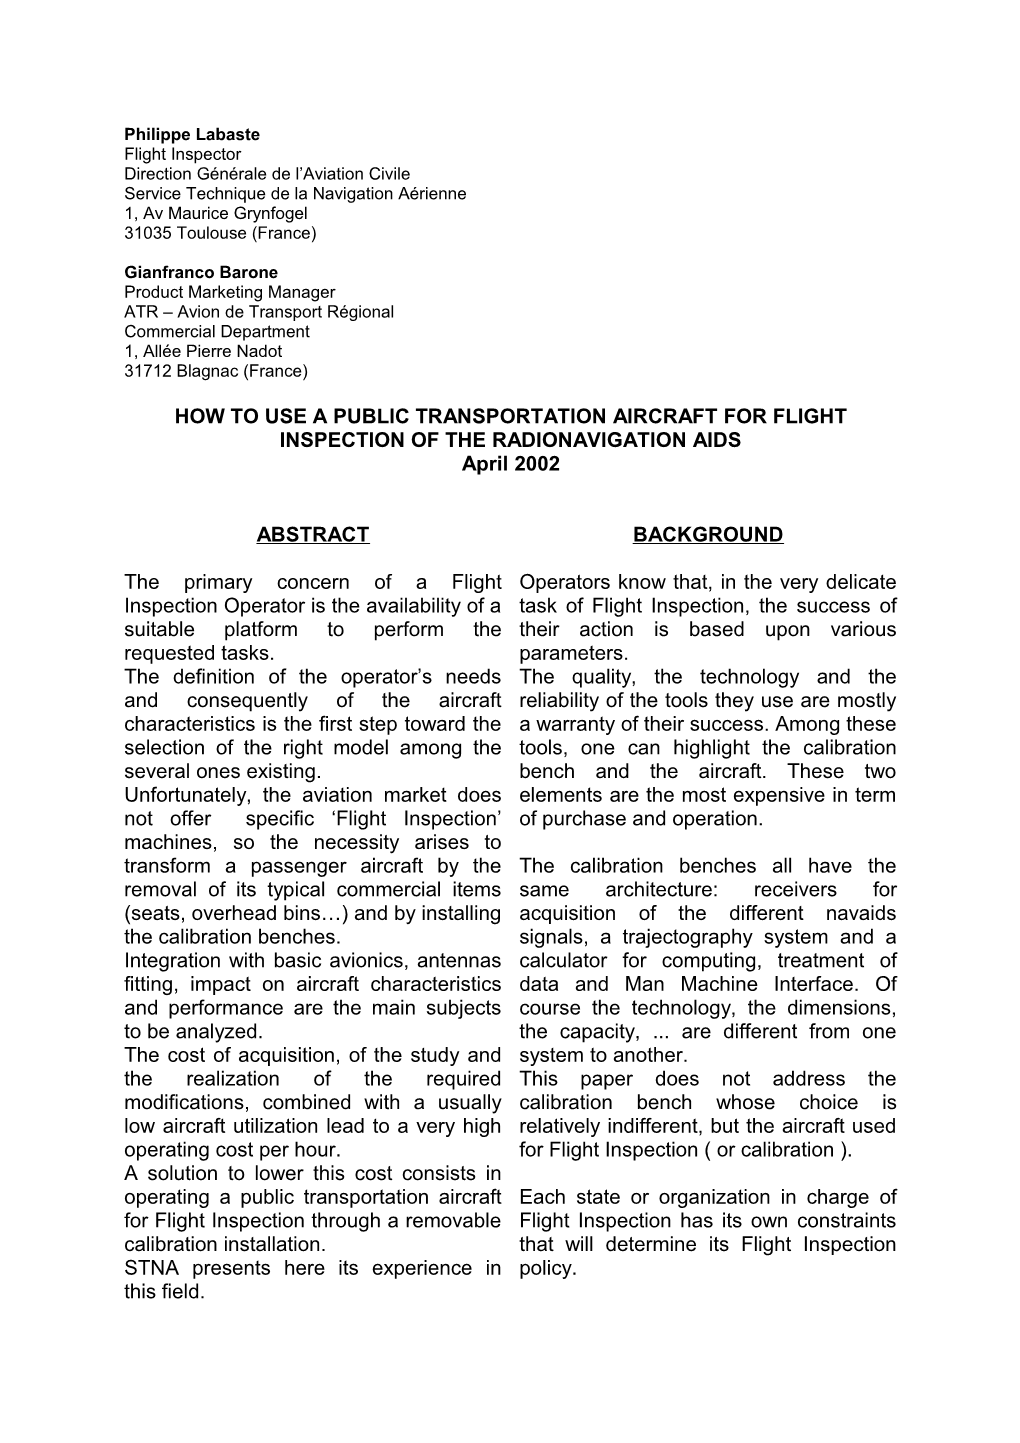 How to Use a Public Transportation Aircraft for Flight Inspection of the Radionavigation Aids